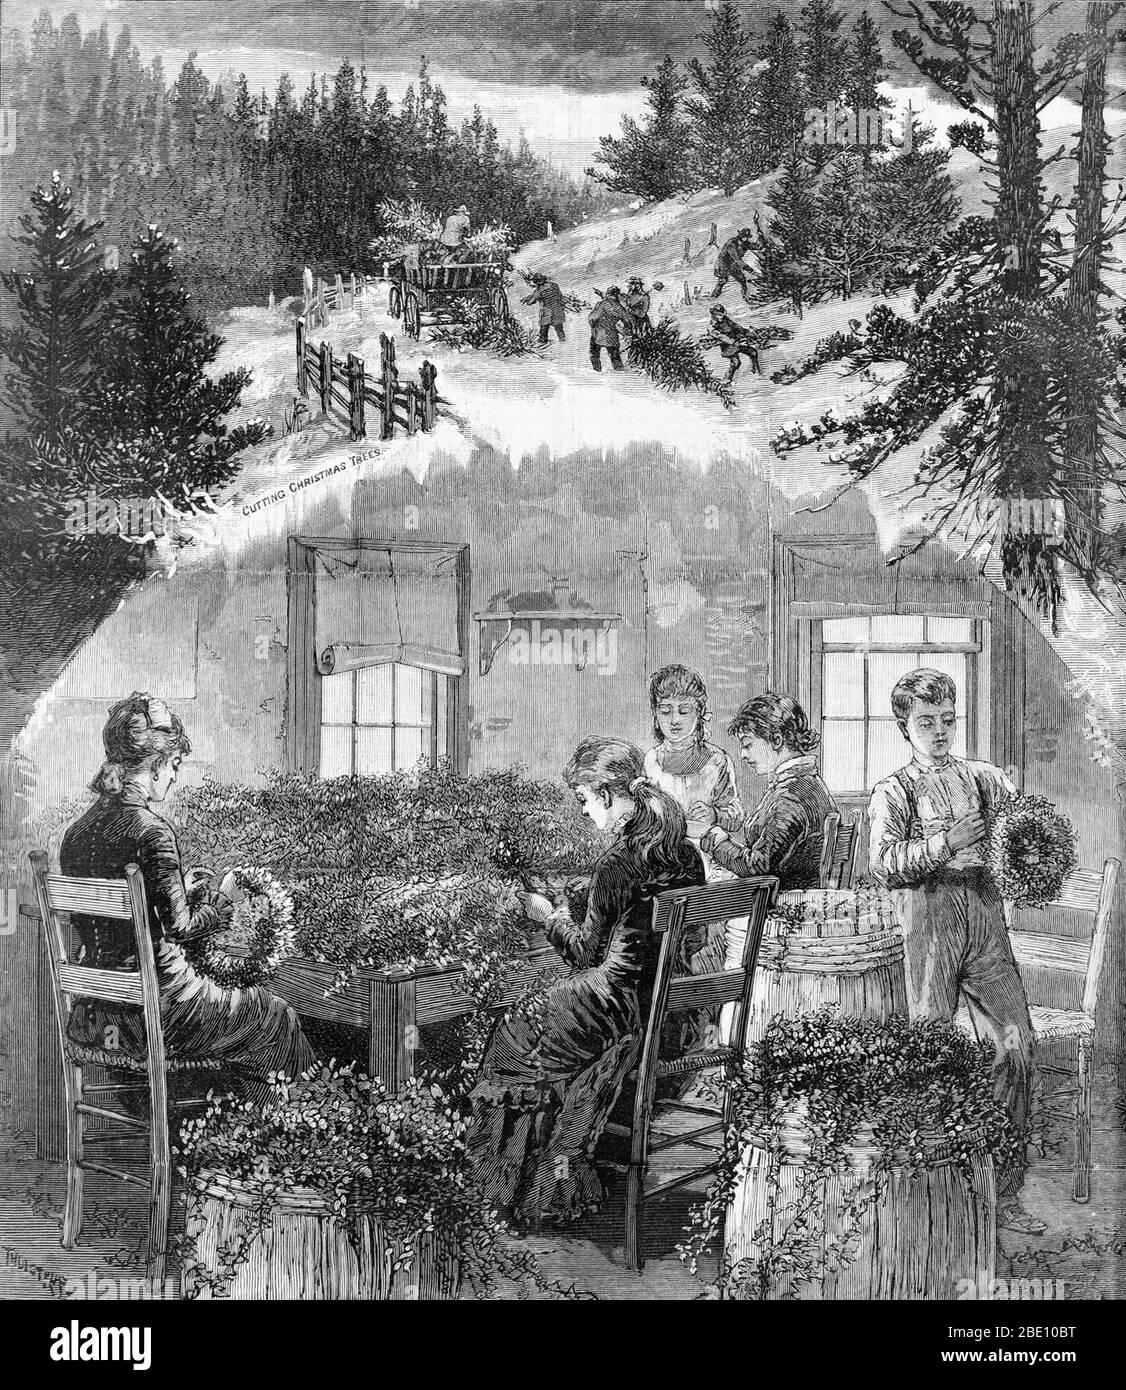 Entitled: 'Preparing Christmas greens. Making wreaths.' Wood engraving showing four women and a boy making wreaths, and scene of people cutting Christmas trees. Christmas wreaths are made from real or artificial conifer branches, or sometimes other broadleaf evergreens like magnolia or holly, along with pinecones and sprays of berries, and Christmas ornaments. A bow is usually used at the top or bottom, and an electric or unlit candle may be placed in the middle. Christmas is an annual commemoration of the birth of Jesus Christ and a widely observed cultural holiday, celebrated on December 25 Stock Photo